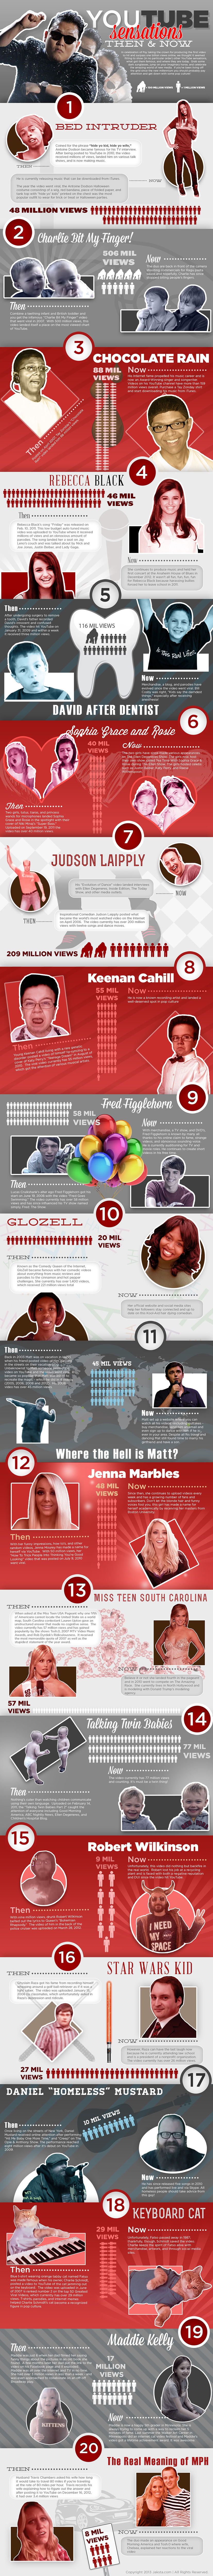 youtube-sensations-now-then-infographic